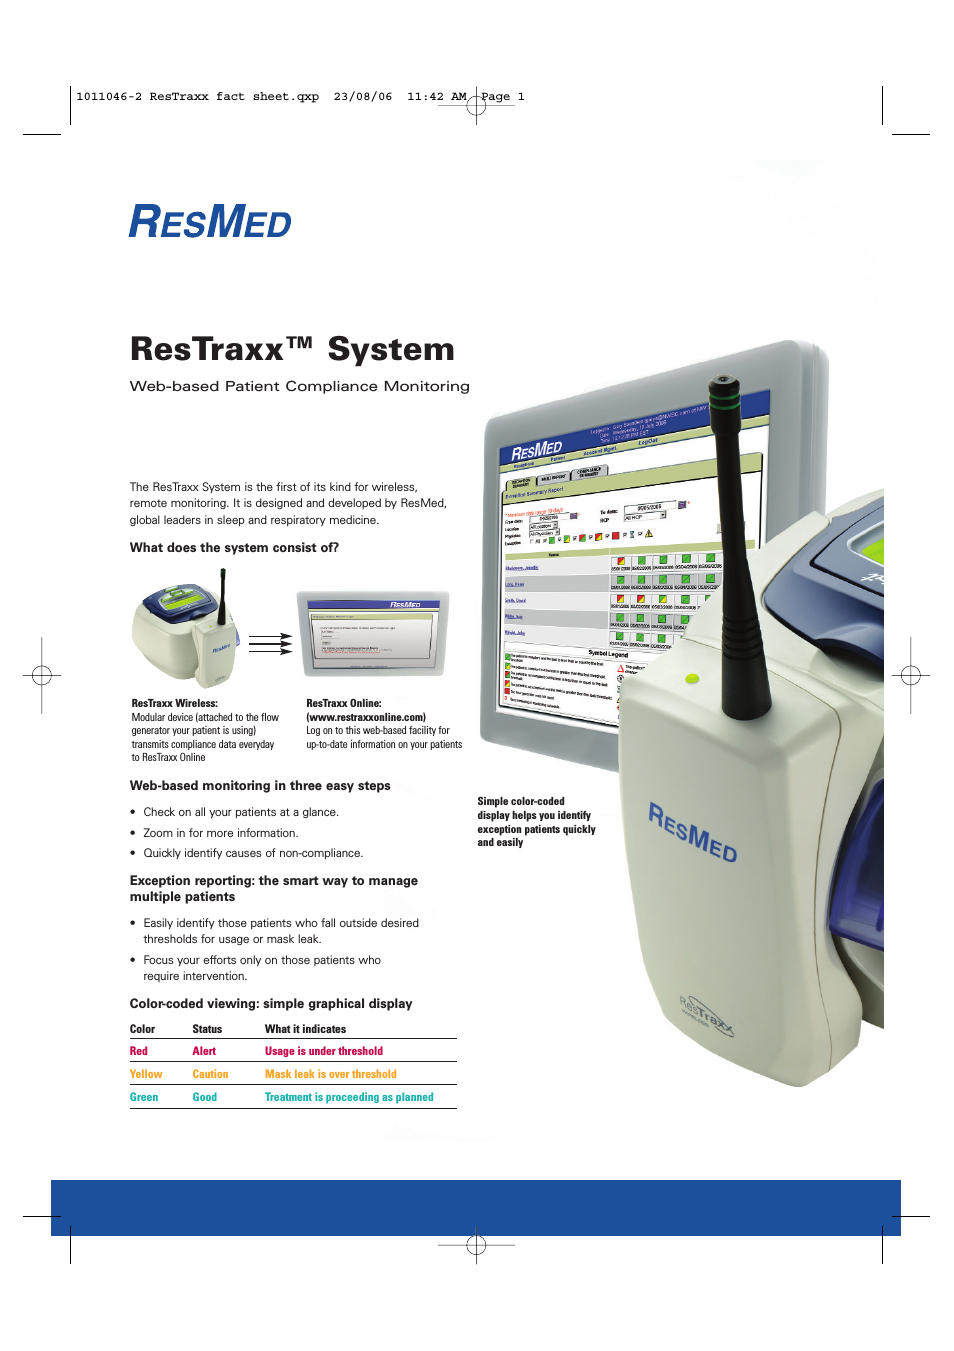 Web-based Patient Monitor ResTraxx System